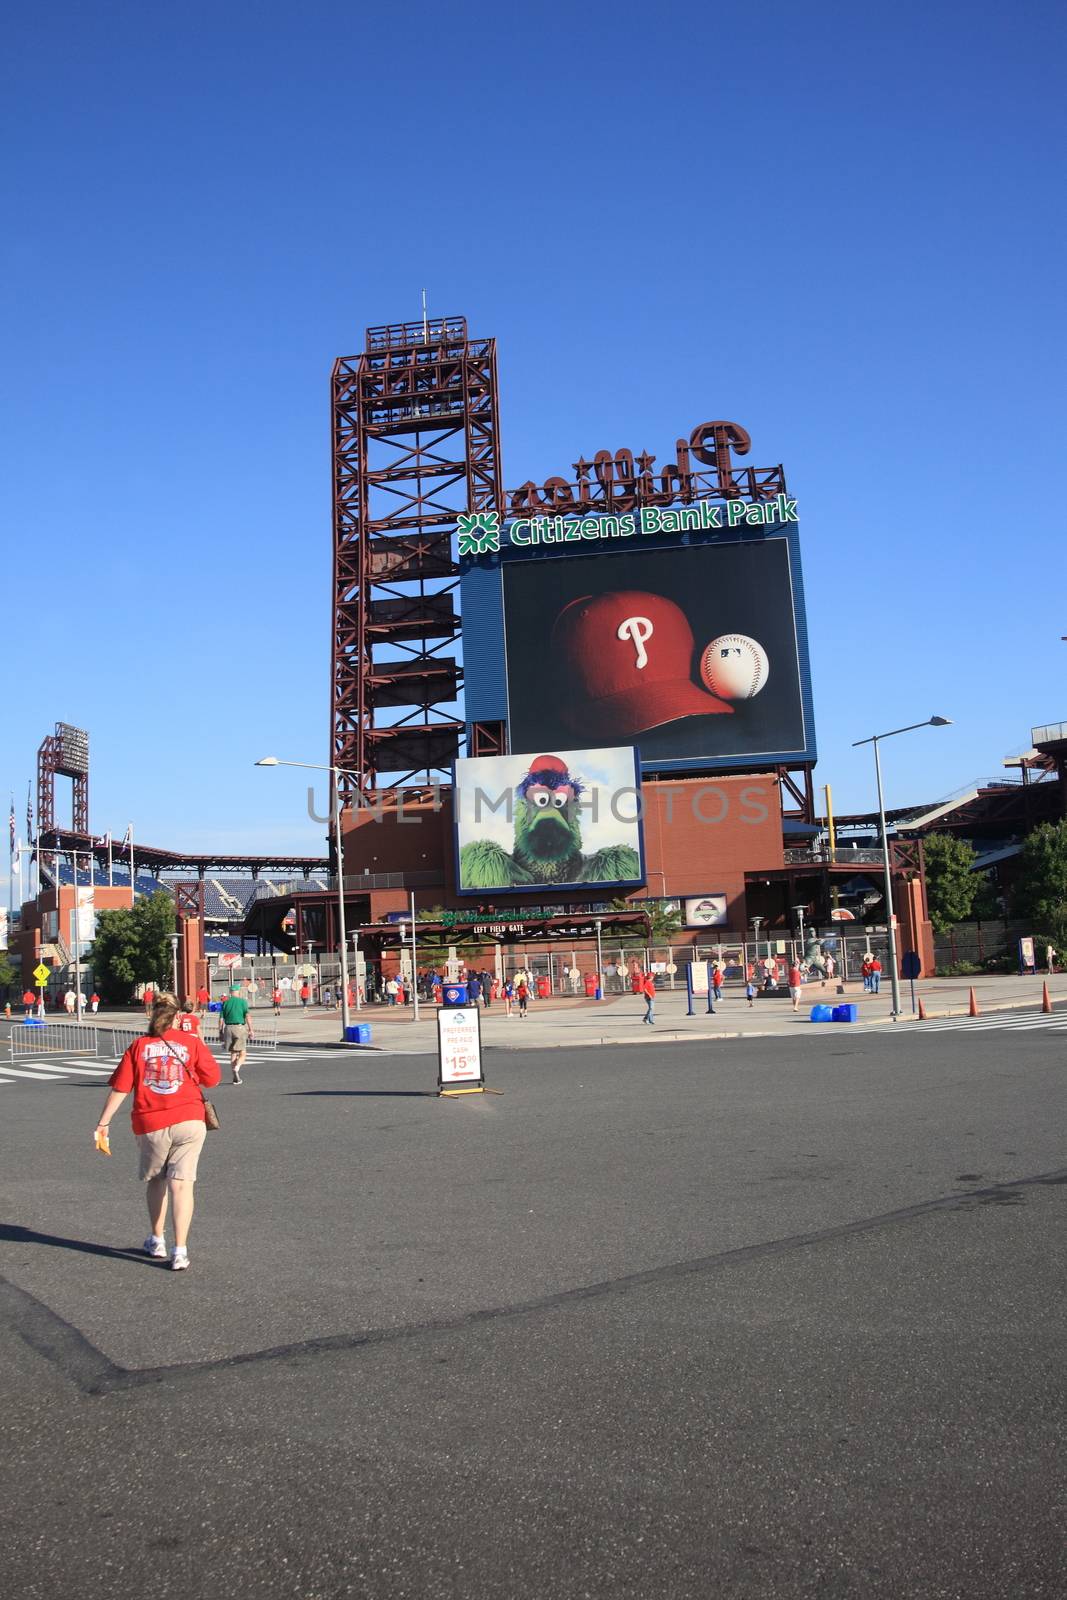 Citizens Bank Park, the Phillies concrete and old fashioned brick ballpark